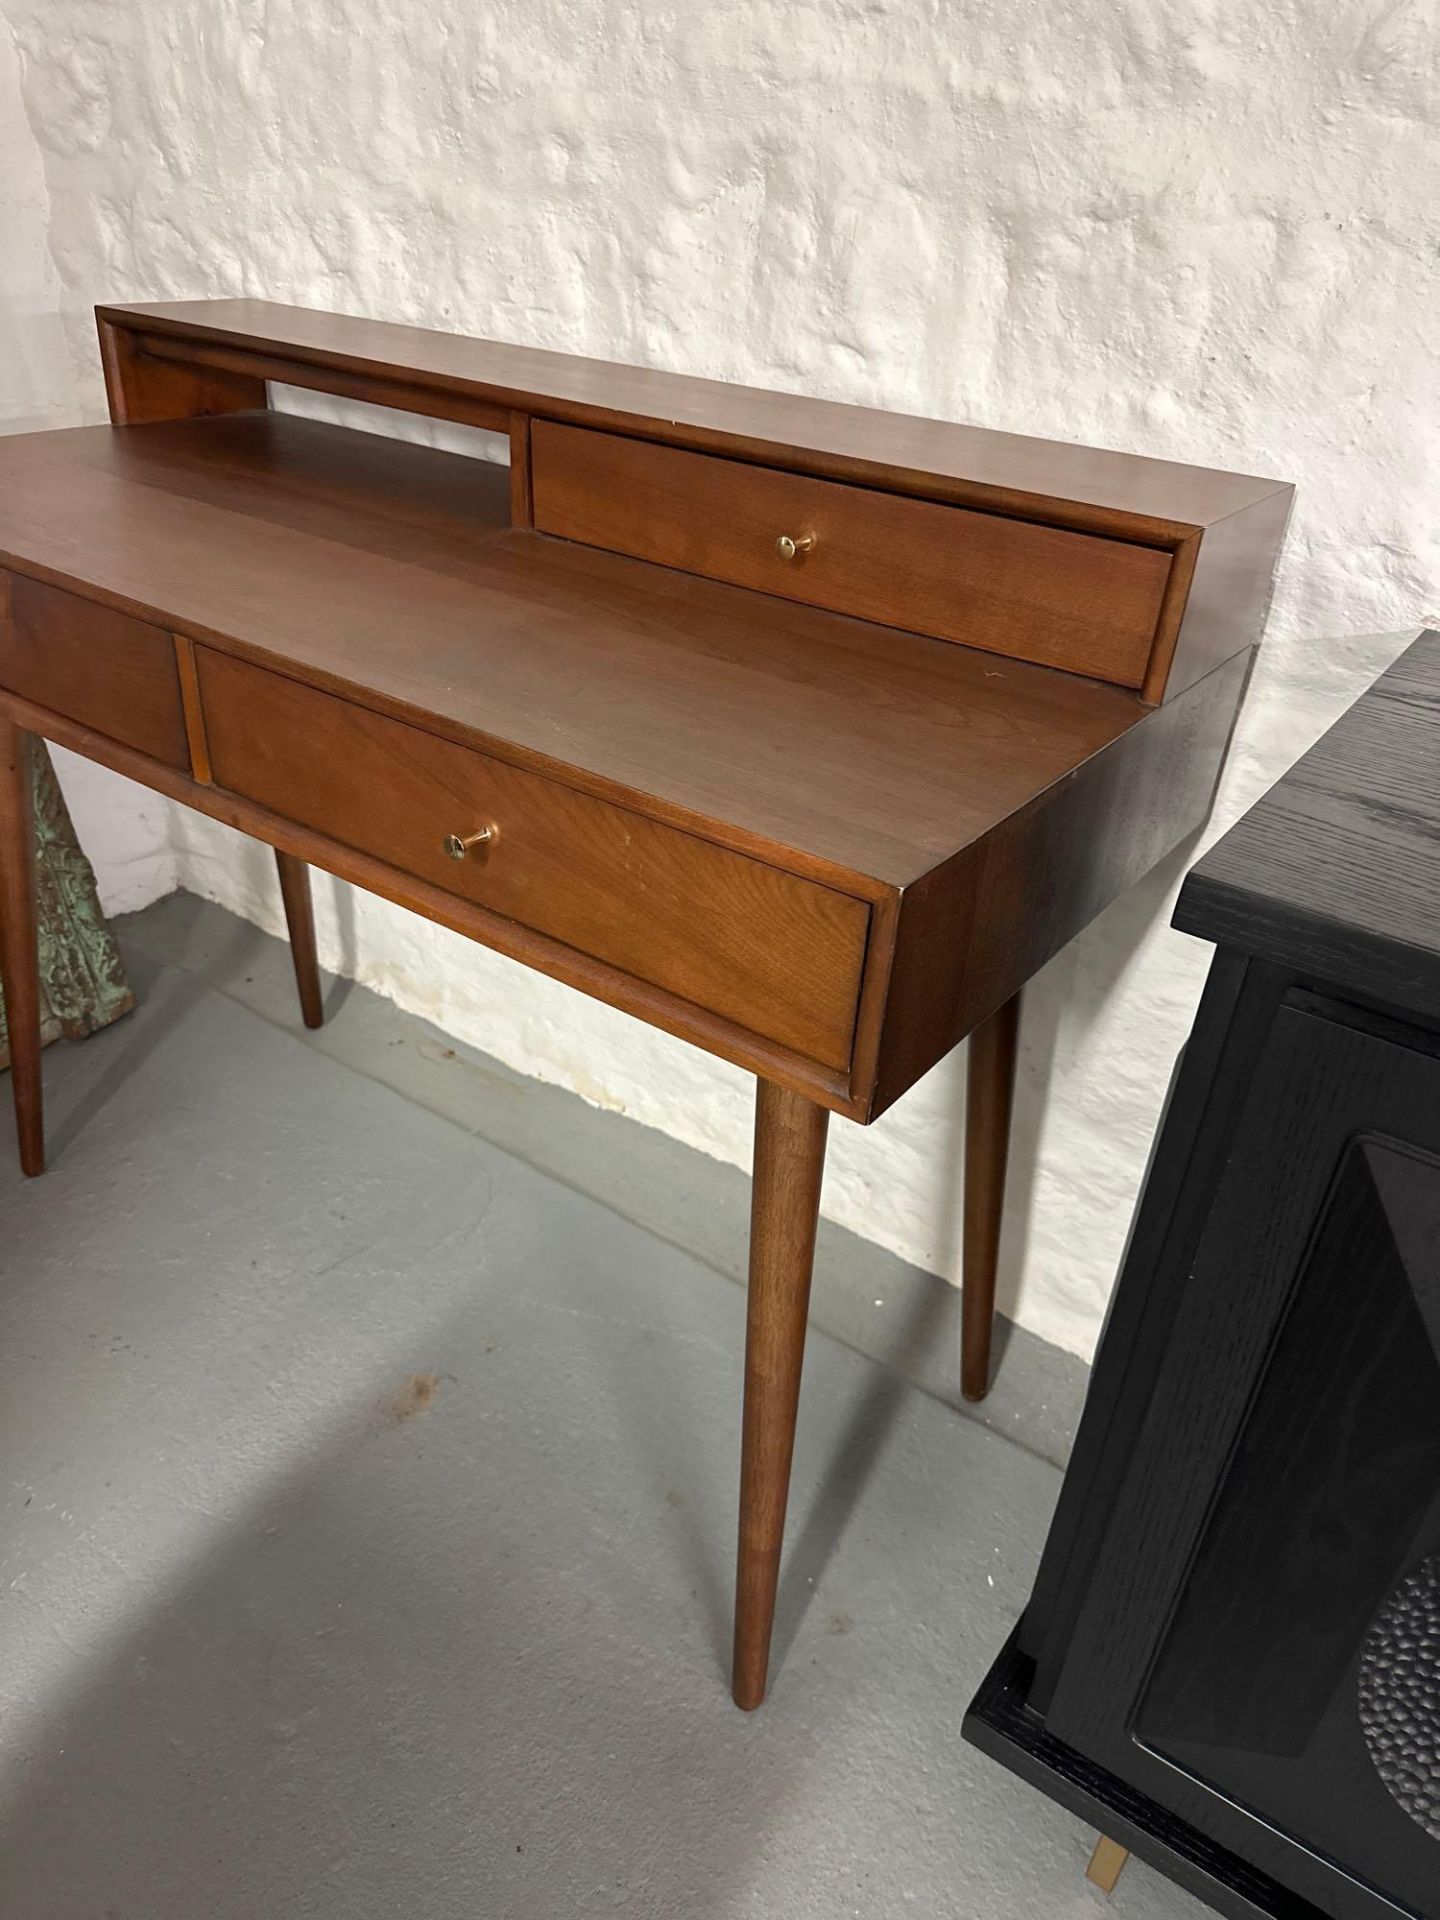 Bailey Desk and Stool Stylish deep brown tones and a smooth finish make this dressing table/desk & - Image 3 of 11